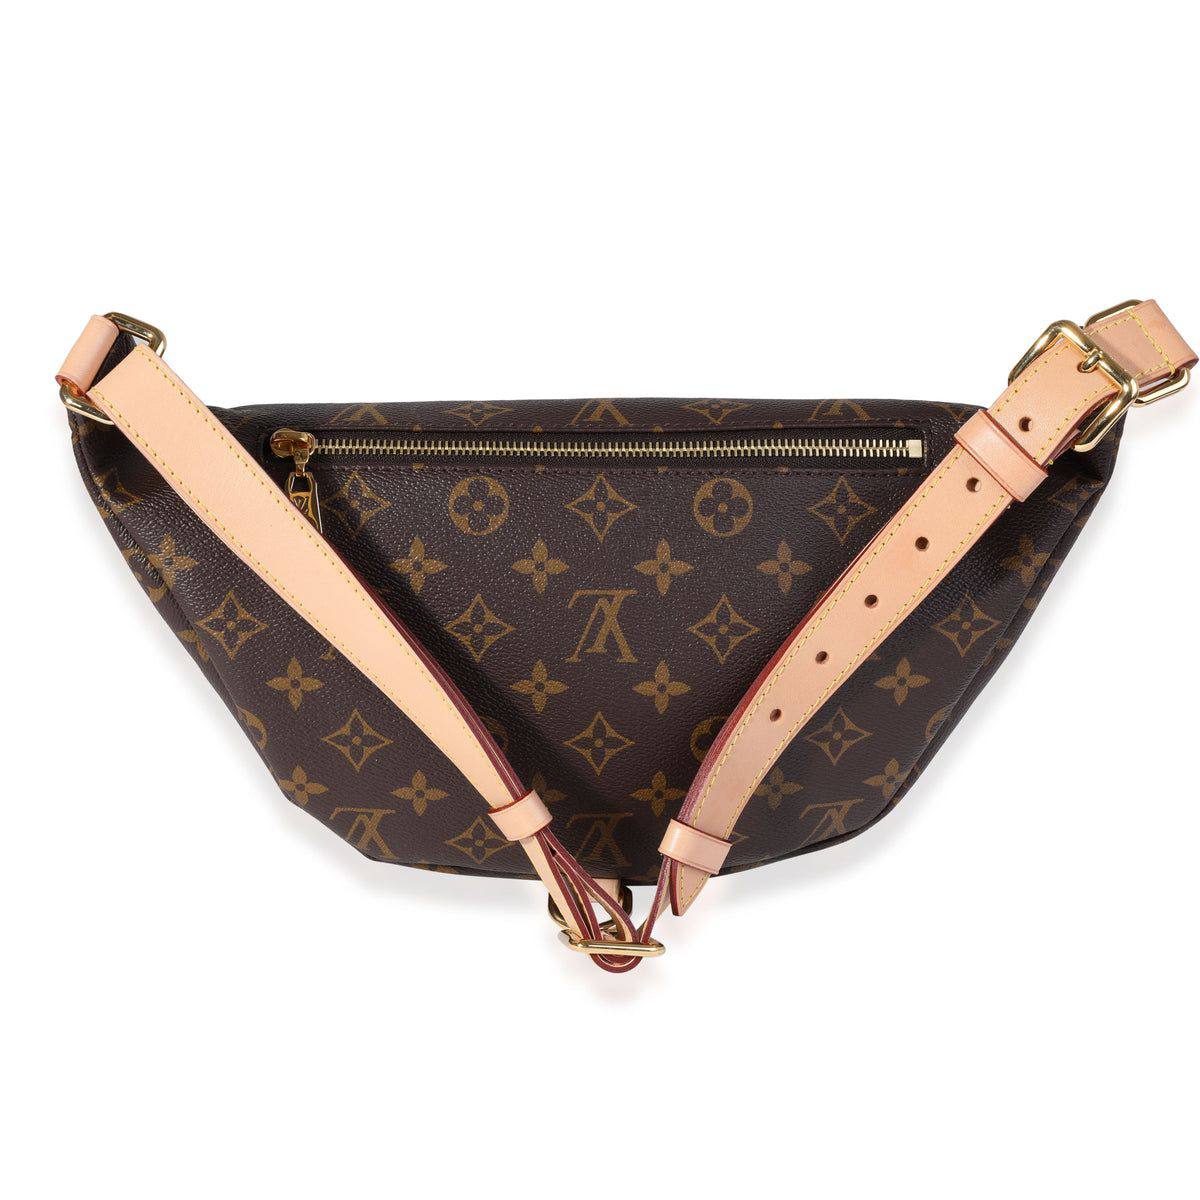 Louis Vuitton Coin Purse editorial stock photo. Image of item - 18821373